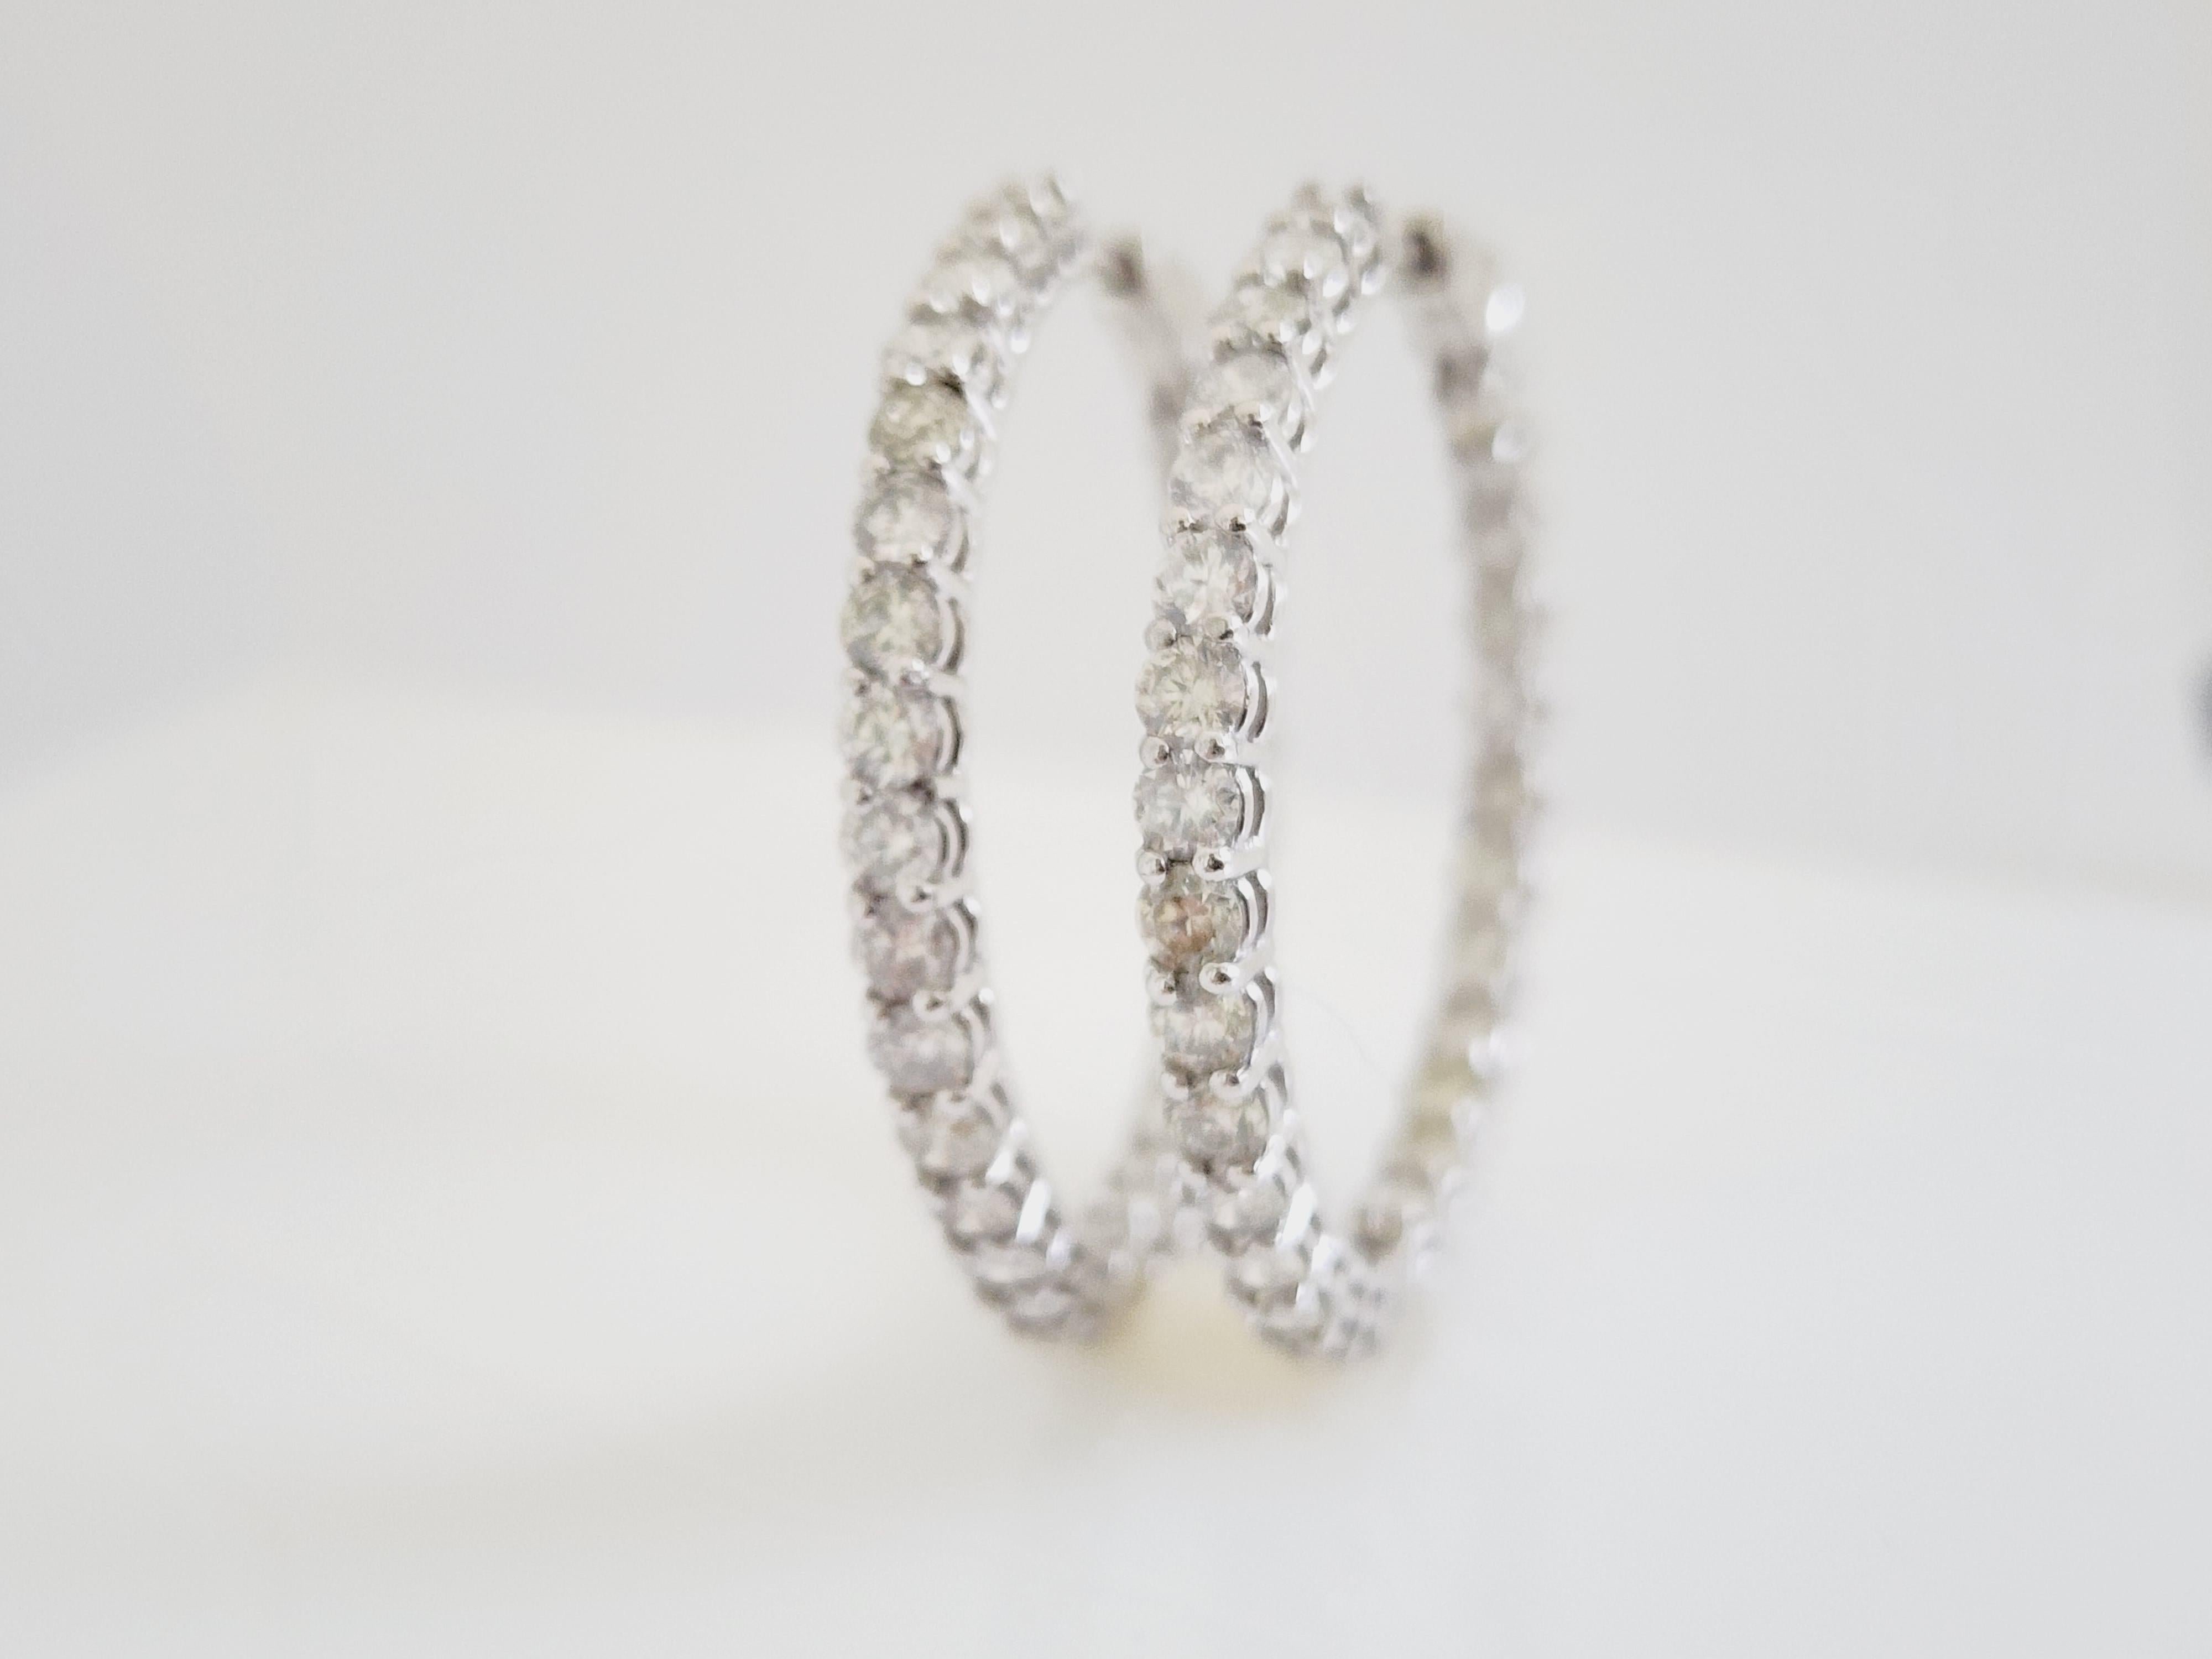 Beautiful pair of natural diamond inside out hoop earrings in 14K white gold. 
Secures with push snap closure for easy wear. 
Average Color H, Clarity SI, 
Measures 1.25 inch diameter. 

*Free shipping within the US*